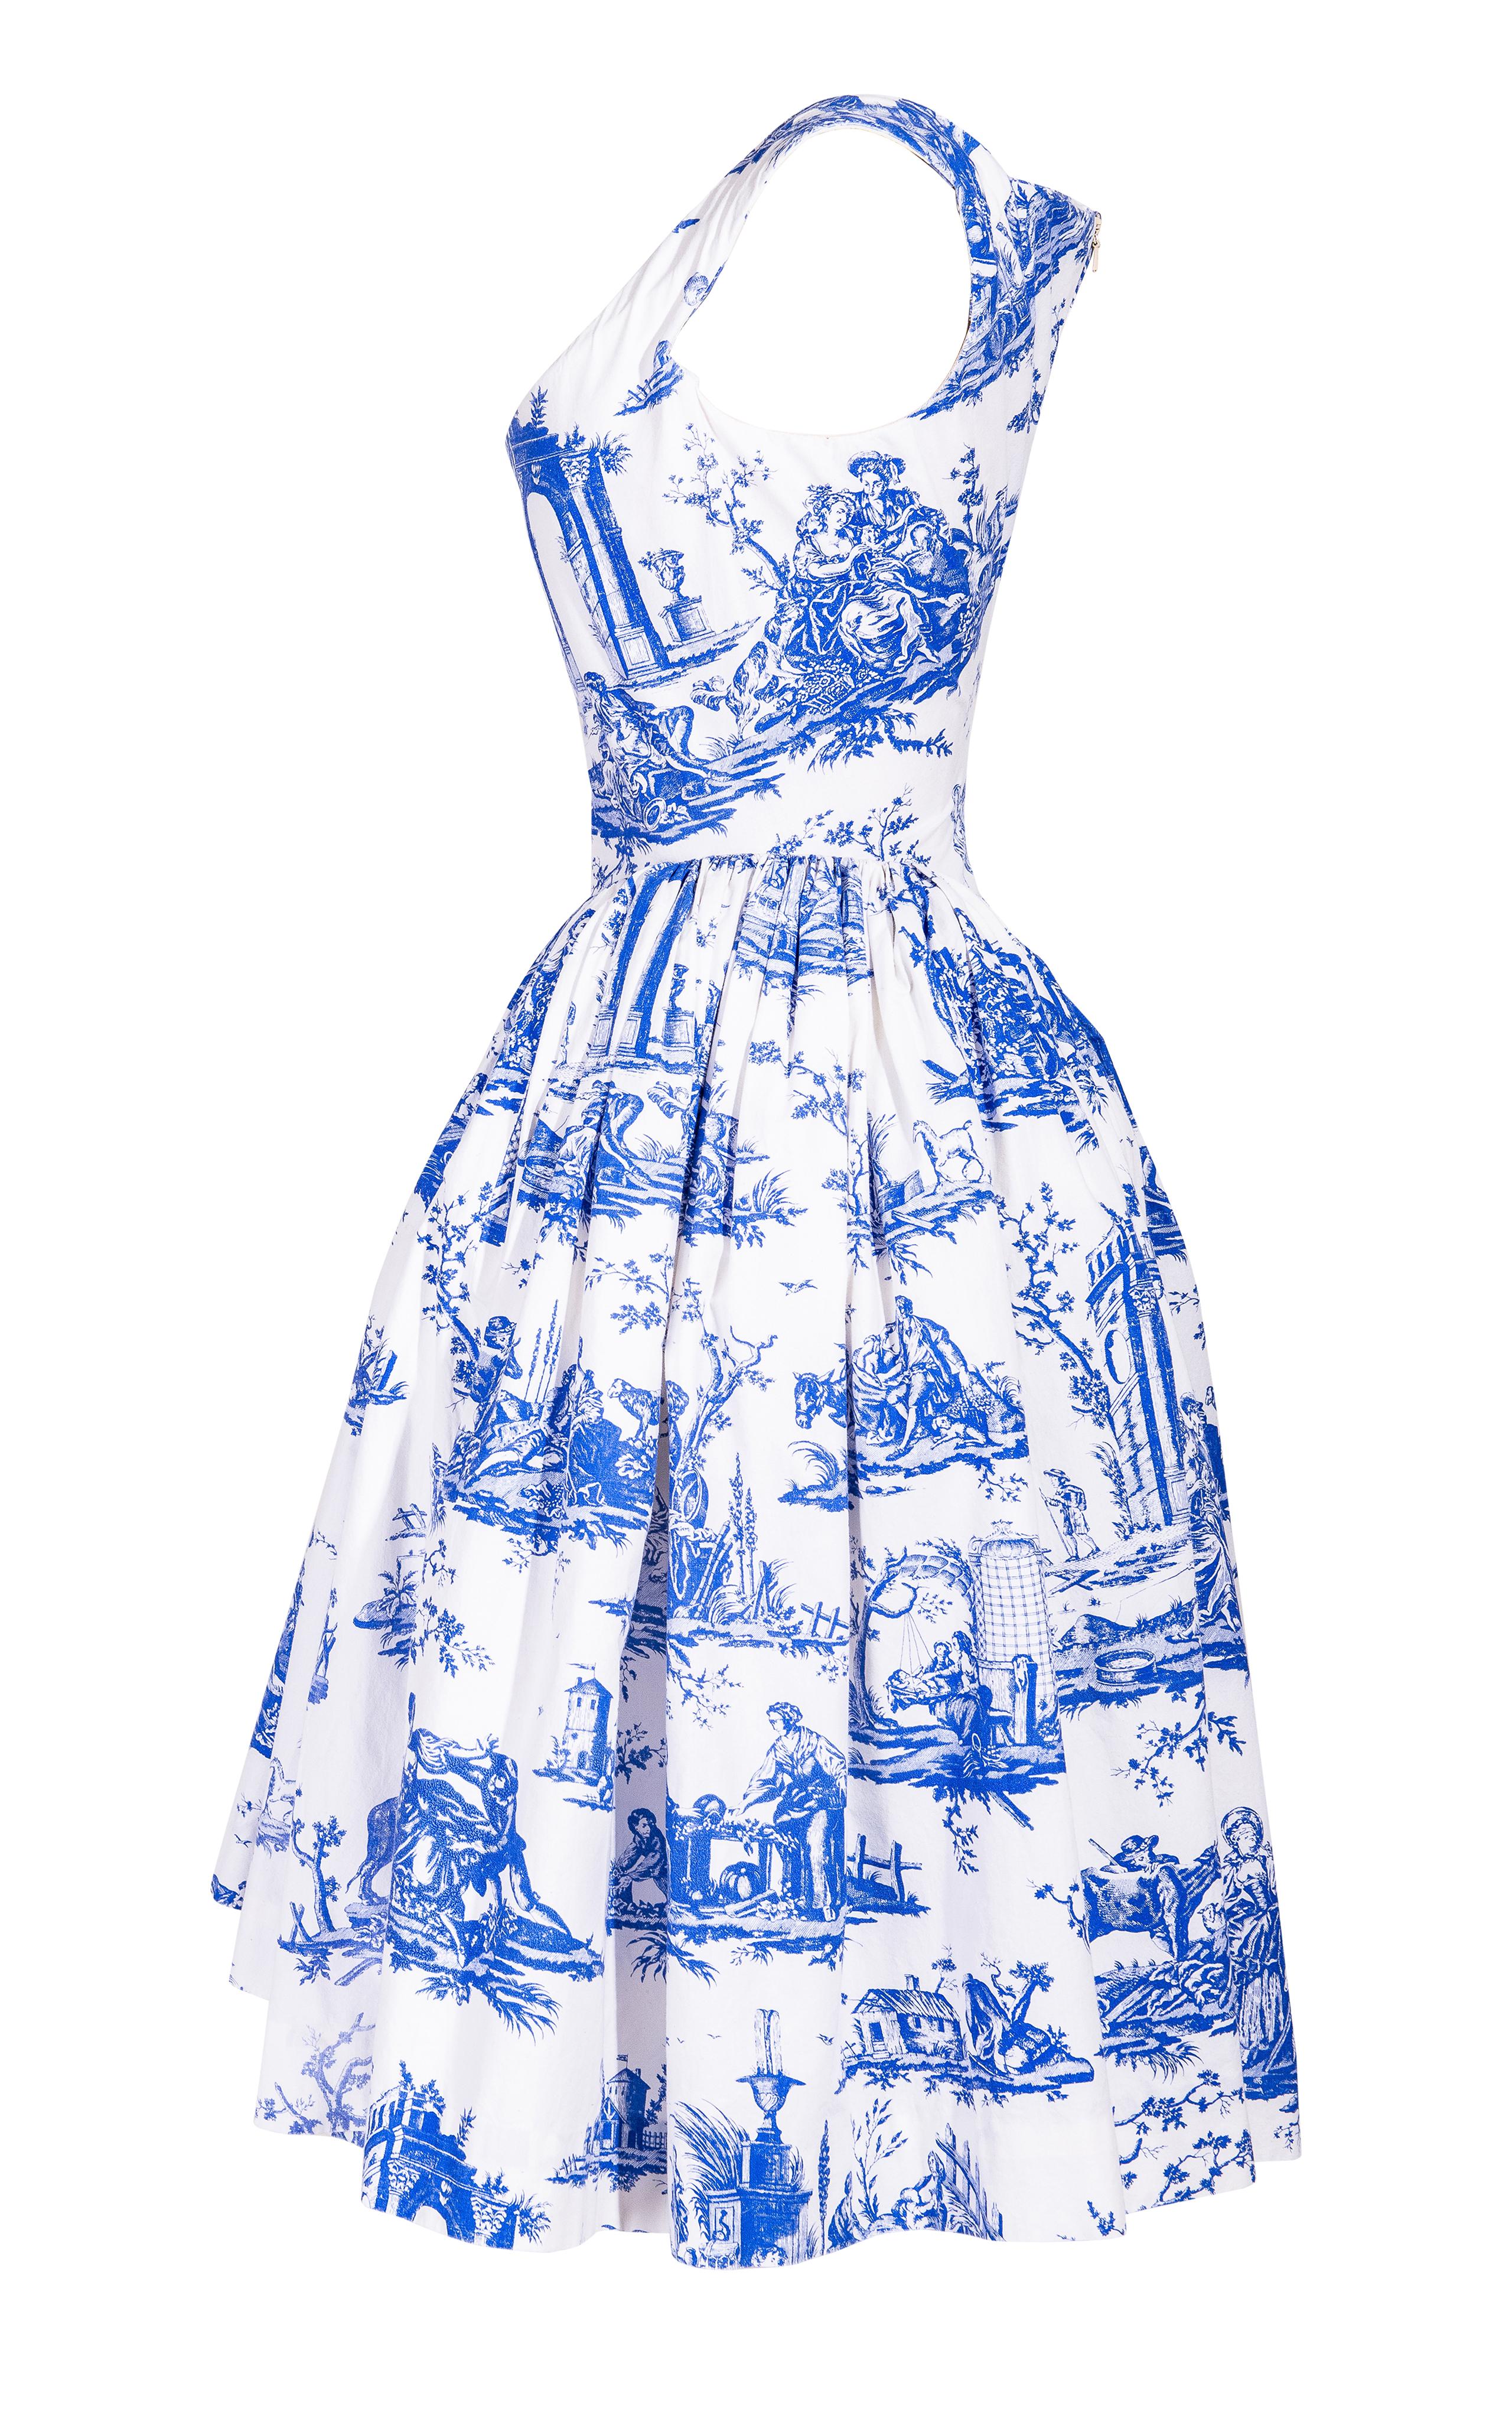 S/S 1996 Vivienne Westwood Toule de Jouy Print Dress In Good Condition In North Hollywood, CA